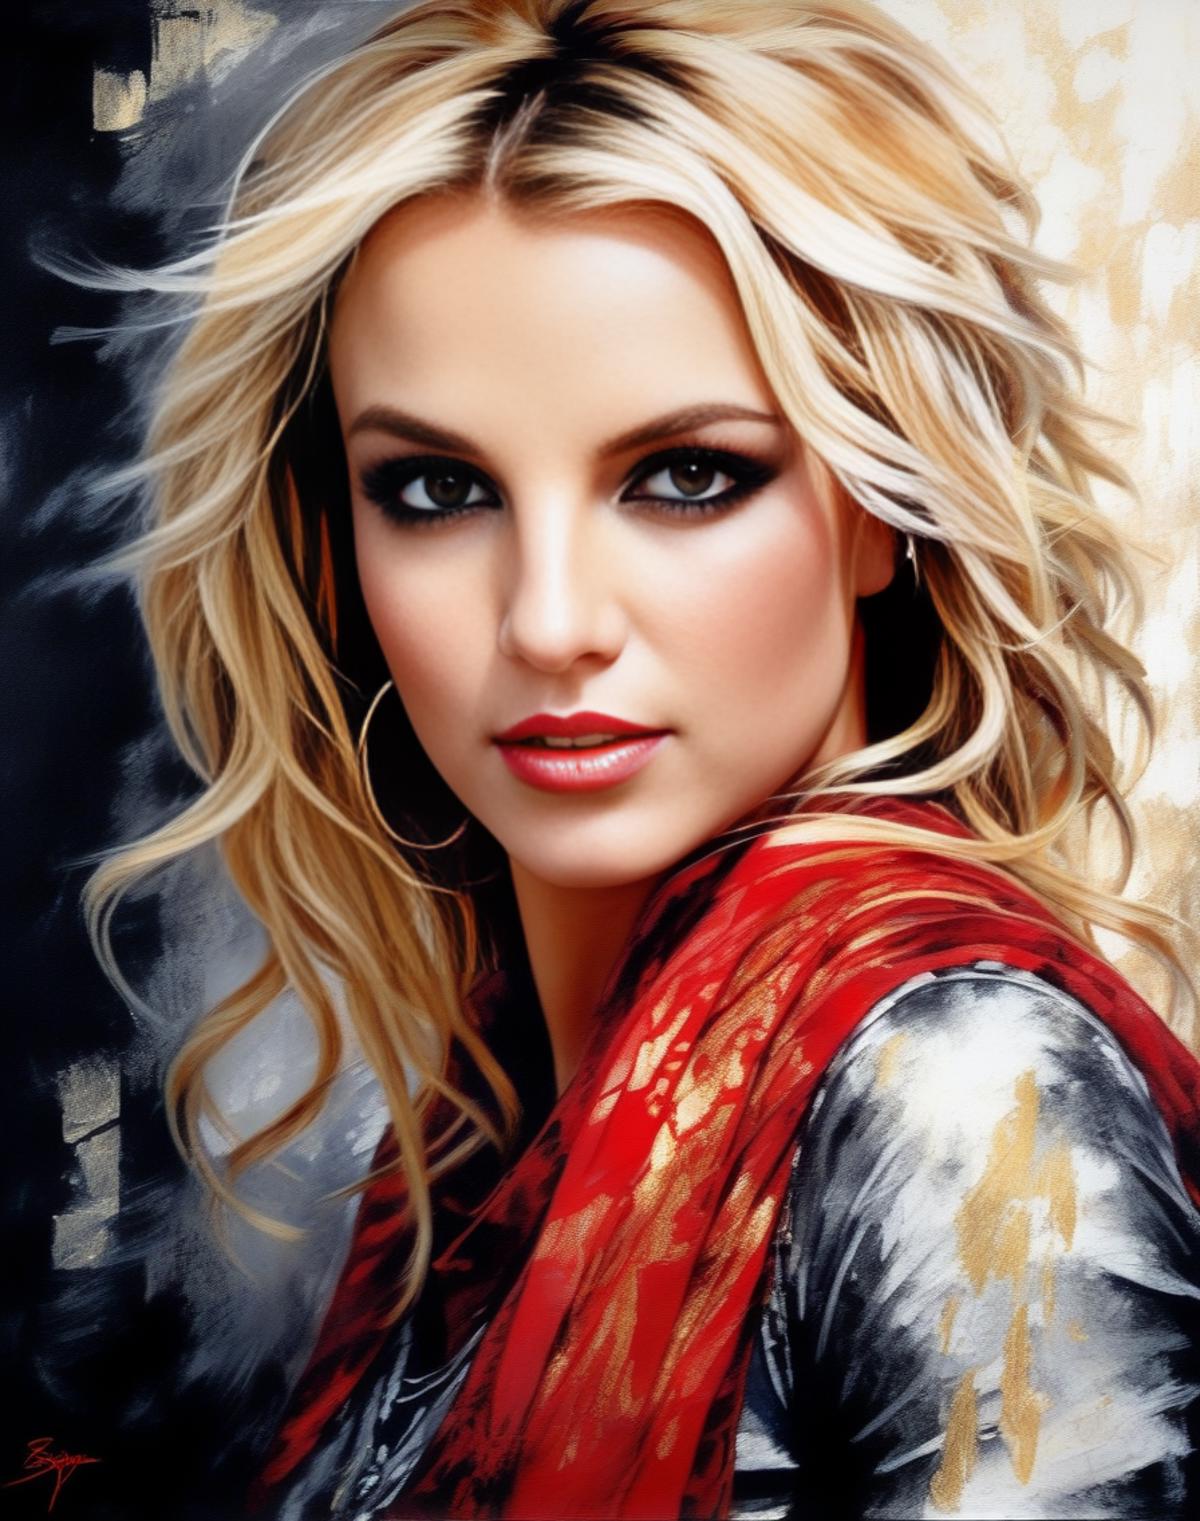 Britney Spears image by parar20